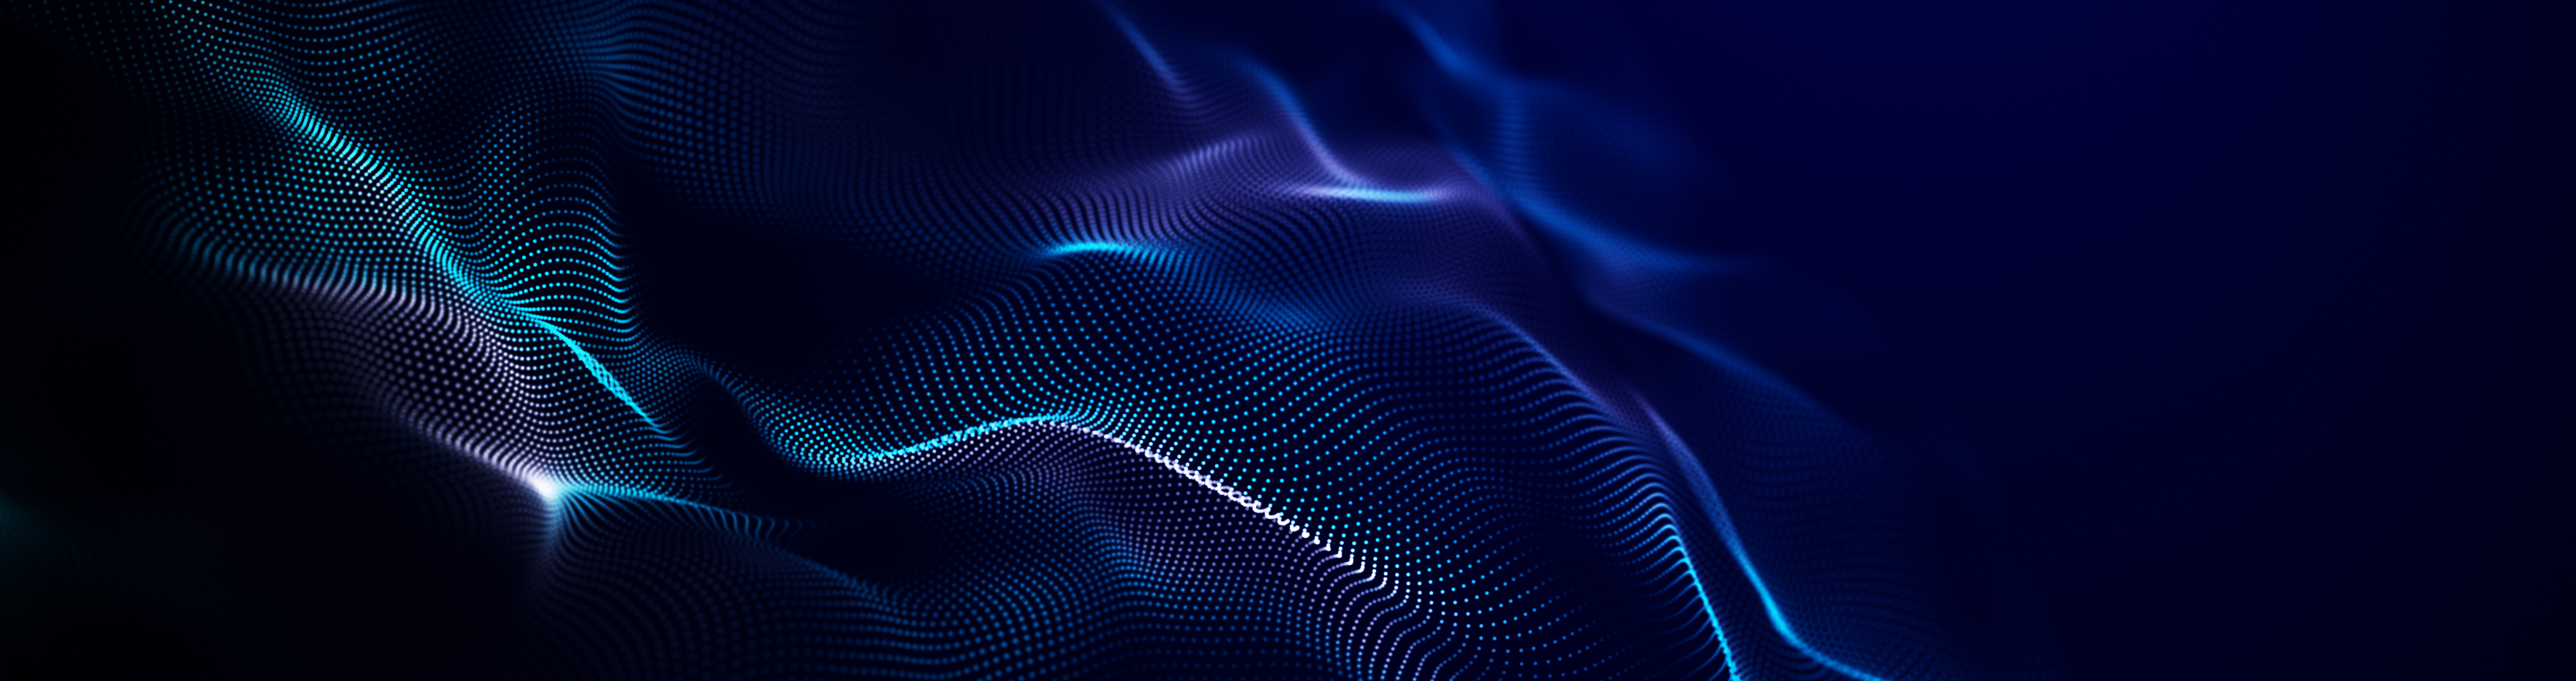 blue and purple dotted waves on a deep blue background